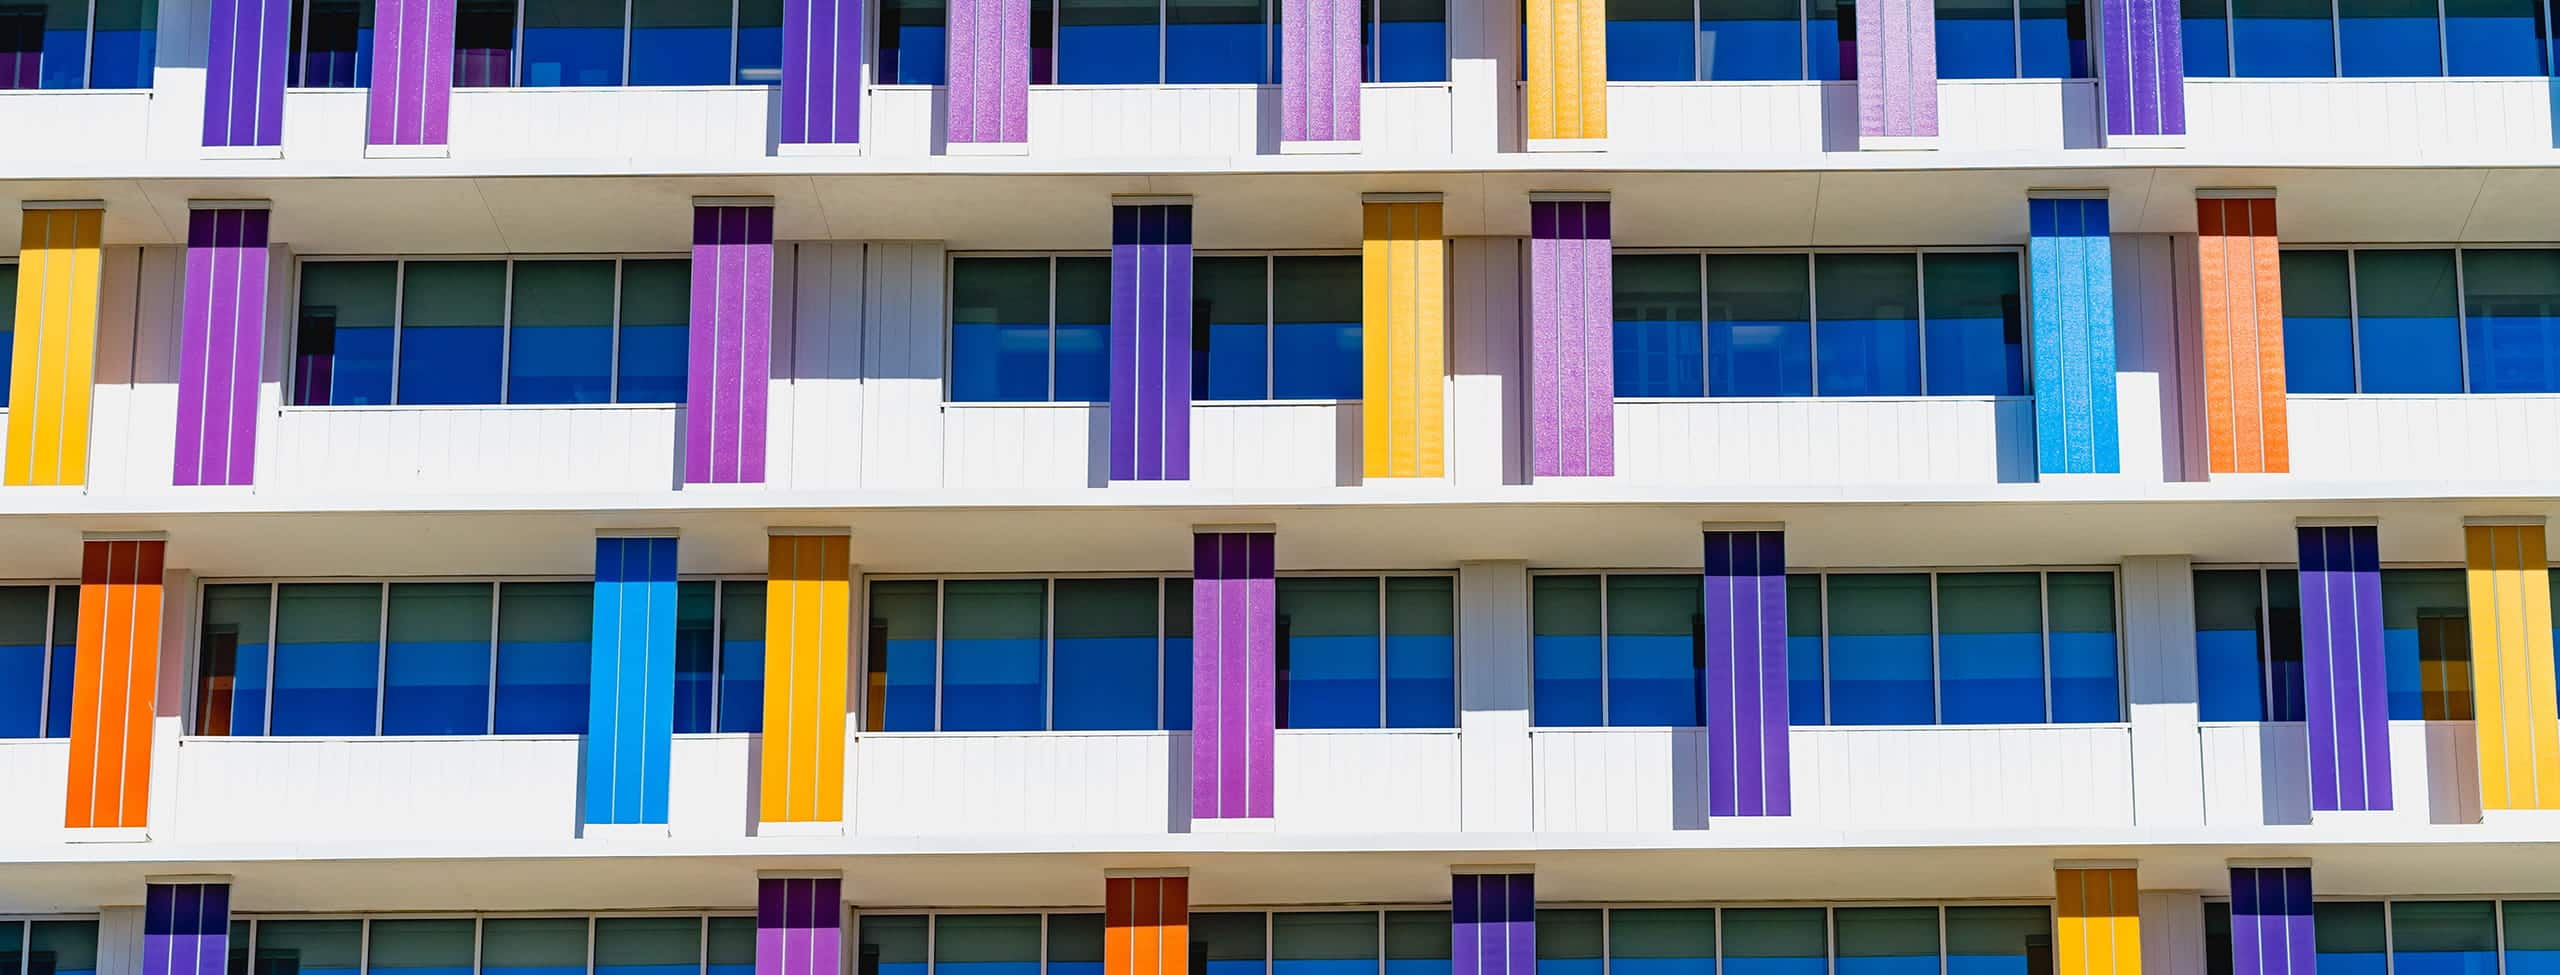 Building with colorful pillars